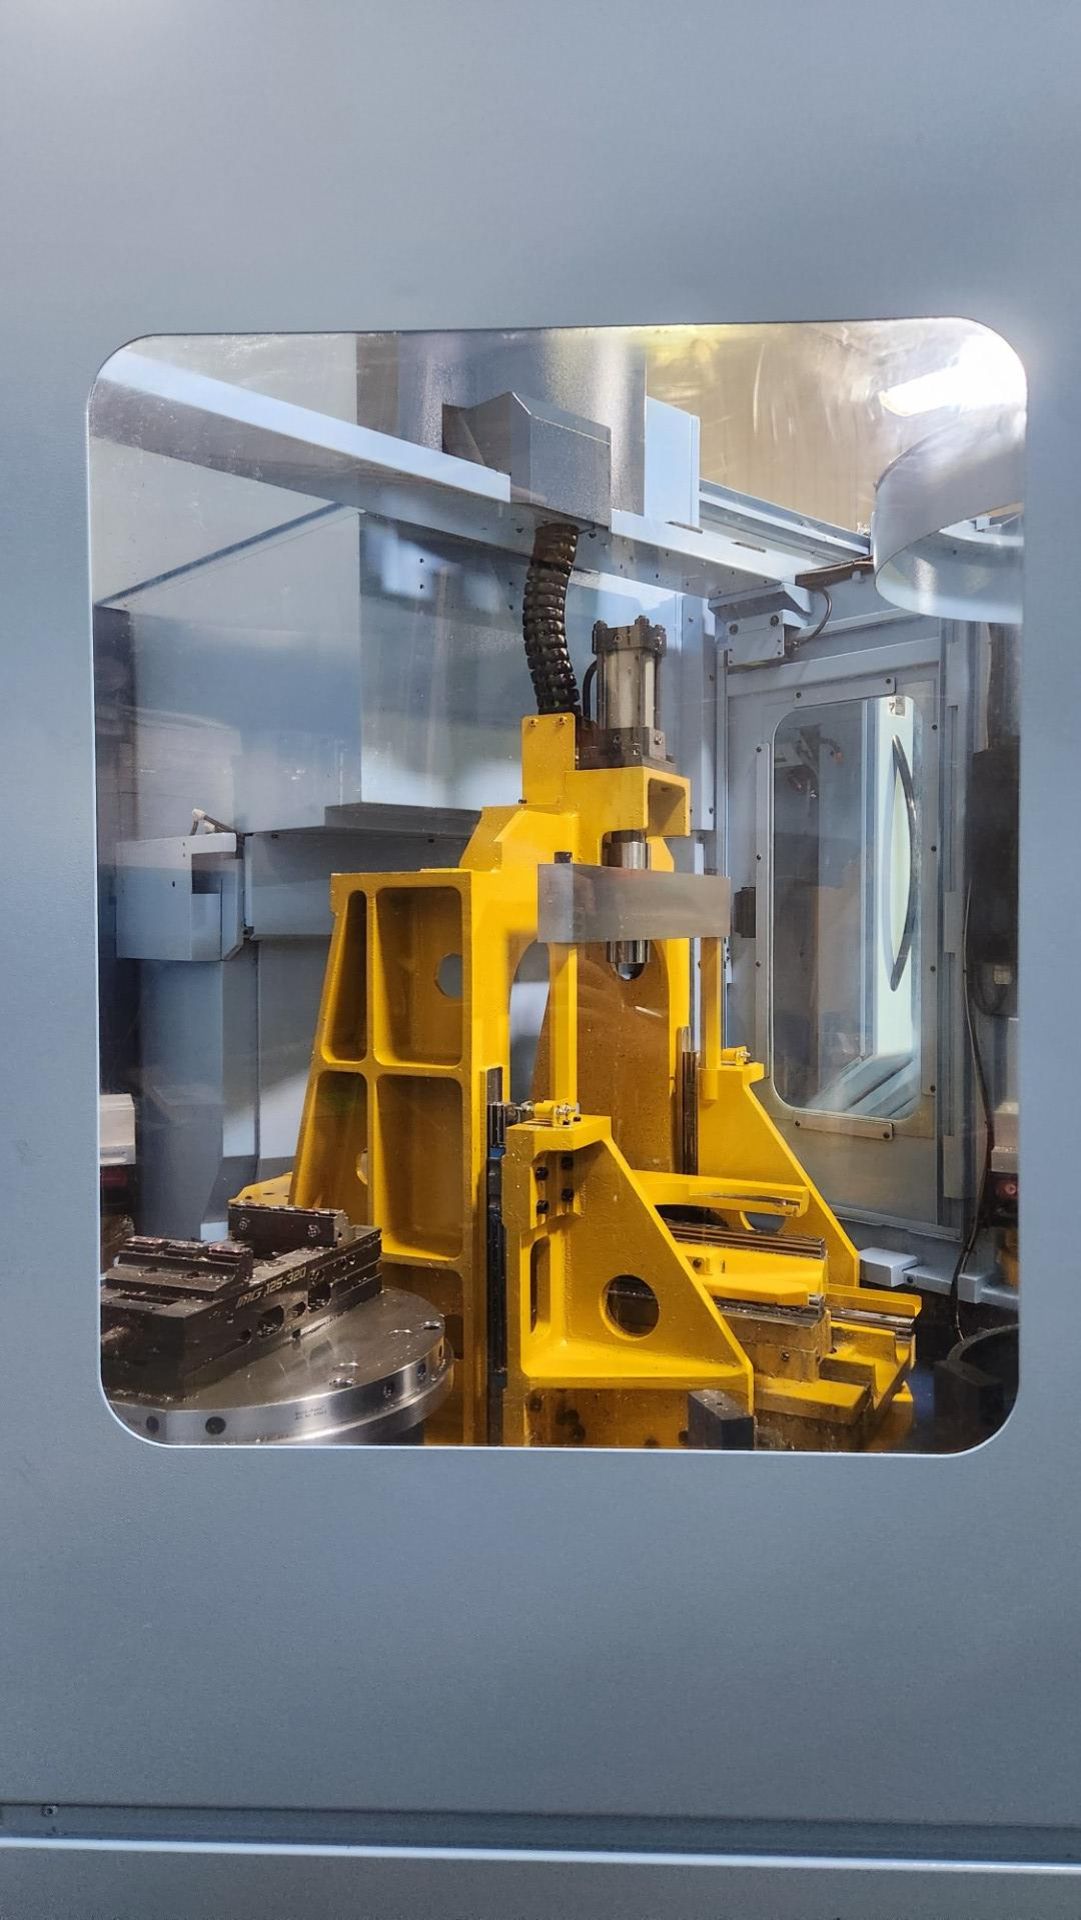 MATSUURA (2019) MX-520 PC4 MULTI-PALLET FULL 5-AXIS HIGH-SPEED CNC VERTICAL MACHINING CENTER WITH - Image 16 of 30